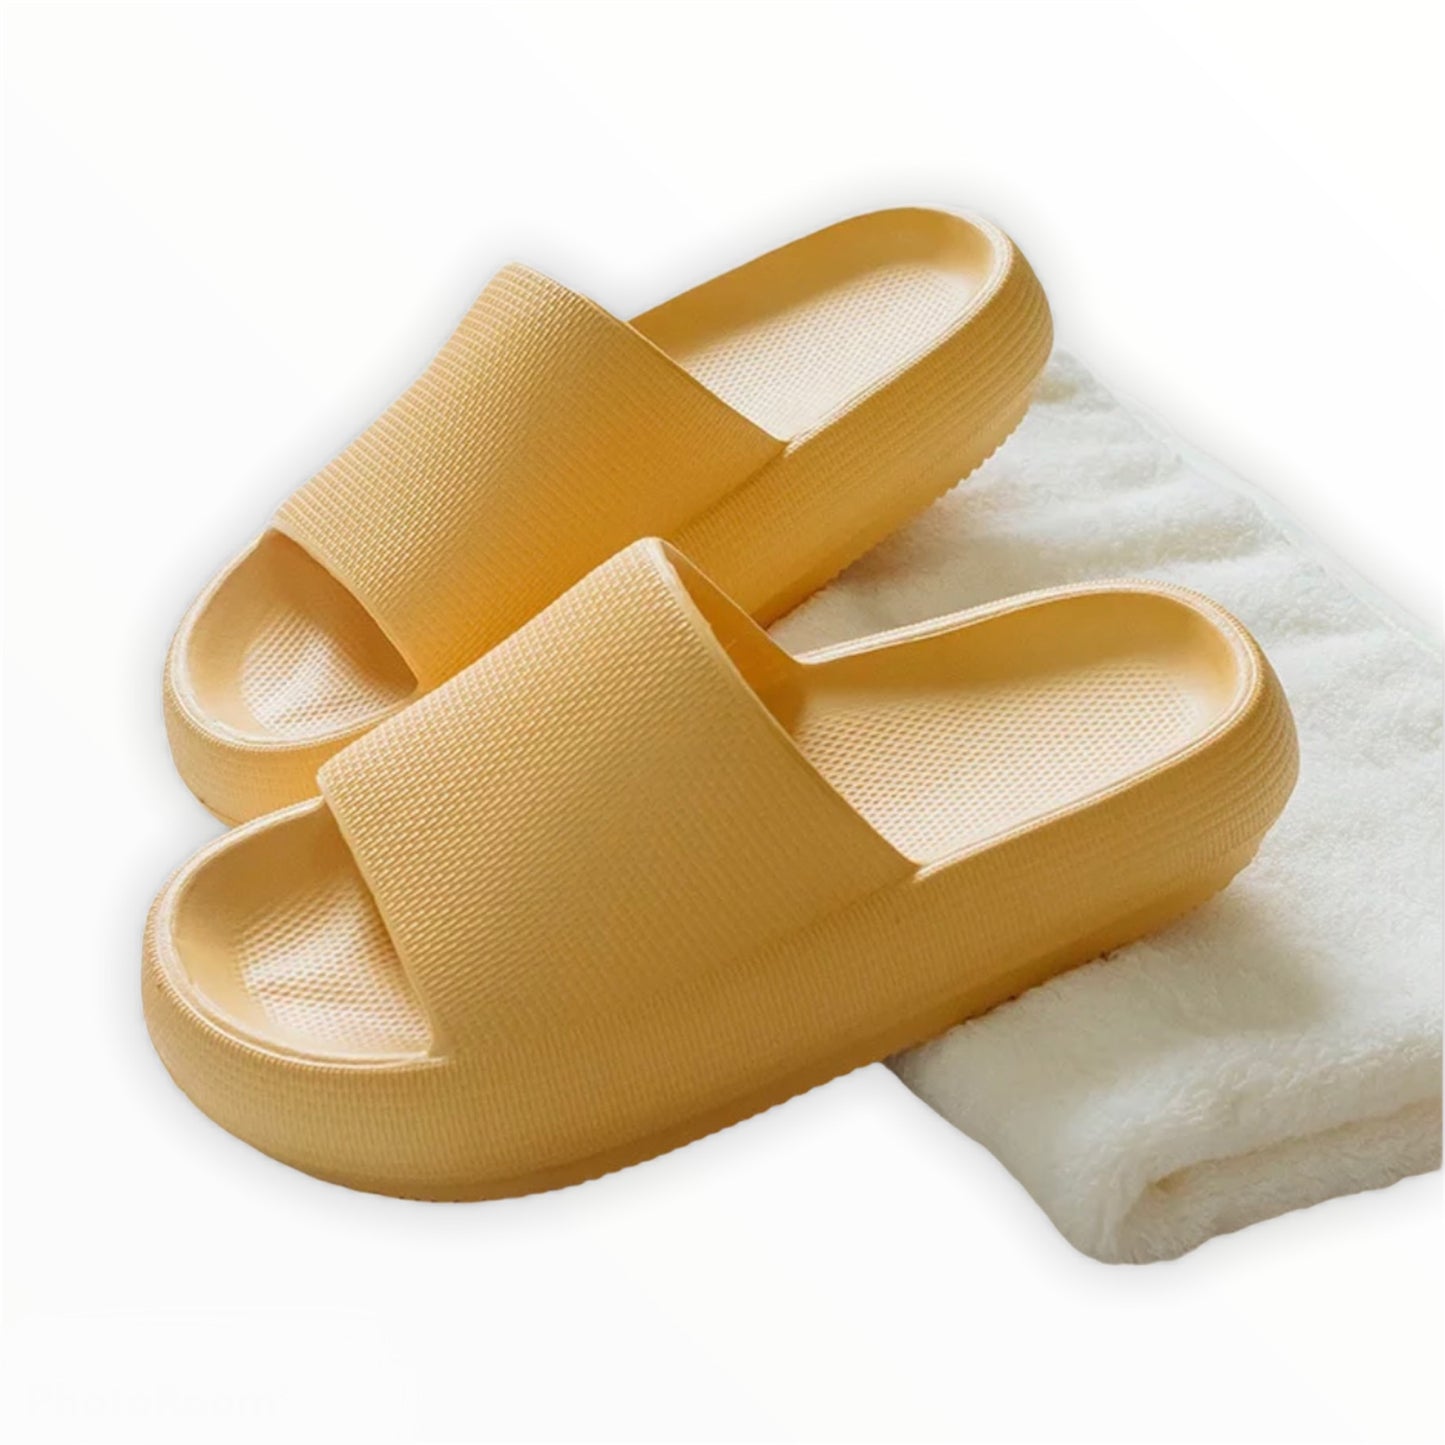 My Pillow Slippers, soft and soothezze.  Bathroom sandals, beach sandals. Yellow thick sole slippers, yeezy.sootheze slippers, arch support slippers, anti-slip, washable sandals, hot girl fashion, summer beach sandals., thick sole slippers, best selling sandals, water slides, elmo yeezy slides, nike offline slides.